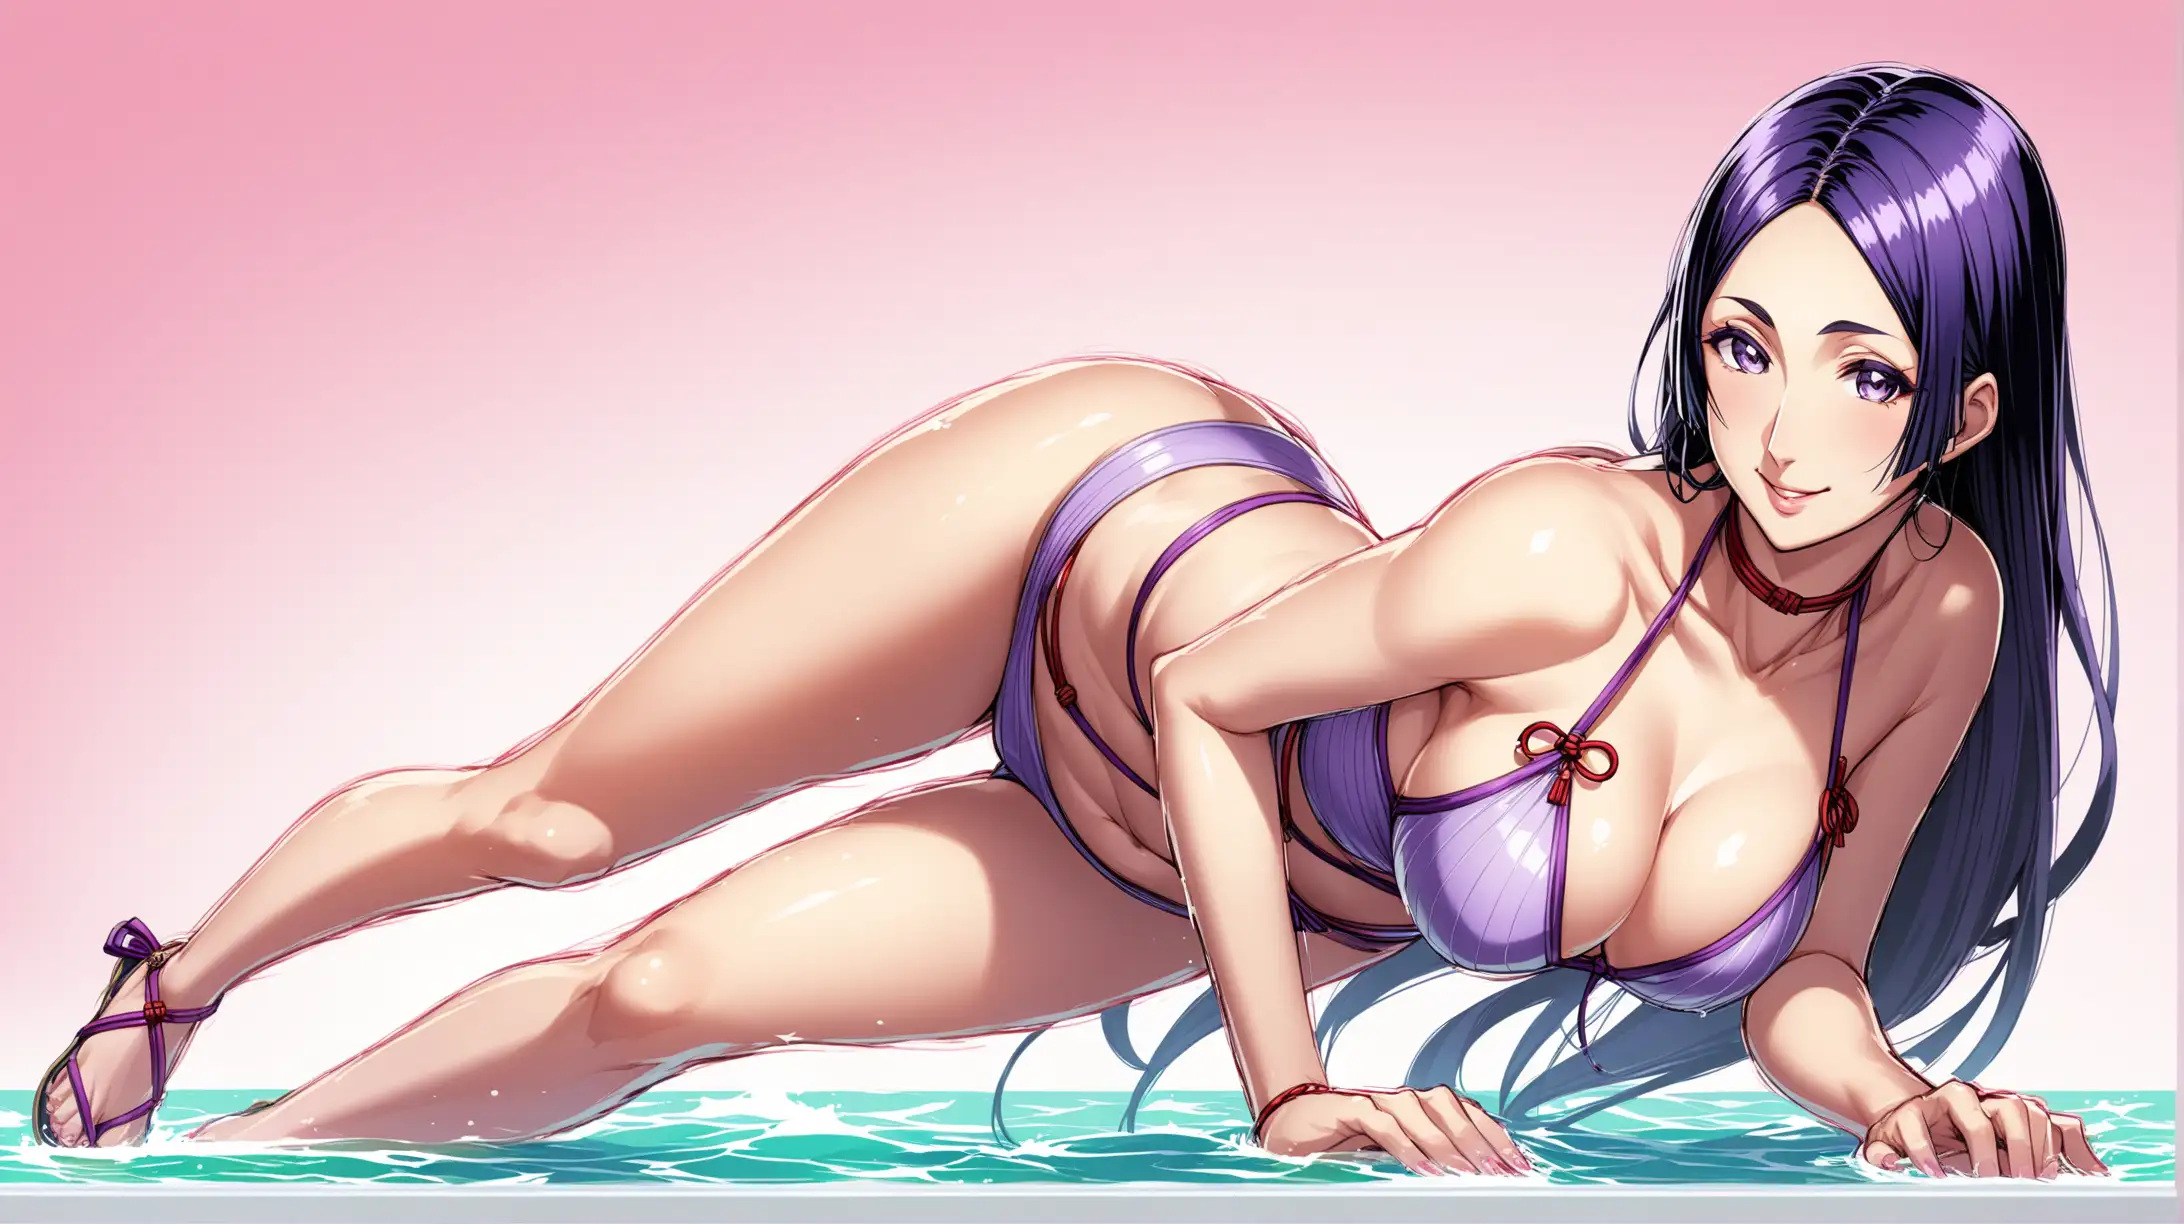 Draw the character Minamoto no Raikou, high quality, standing in a seductive pose, wearing a swimsuit, leaning forward, smiling at the viewer